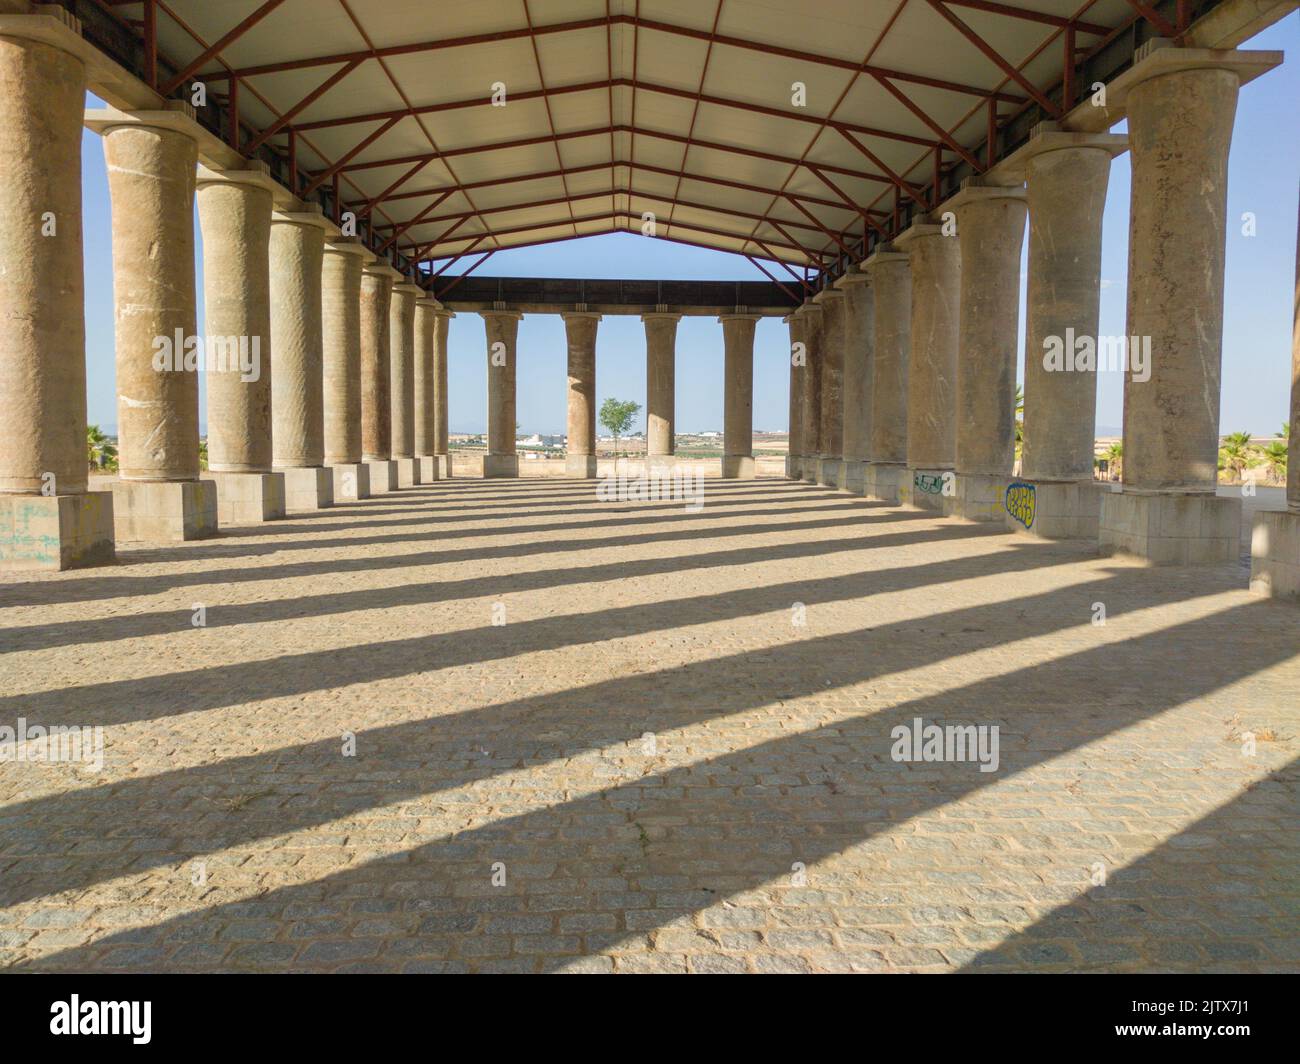 Parthenon replica built with recycled building materials. Don Benito, Badajoz, Spain. Stock Photo